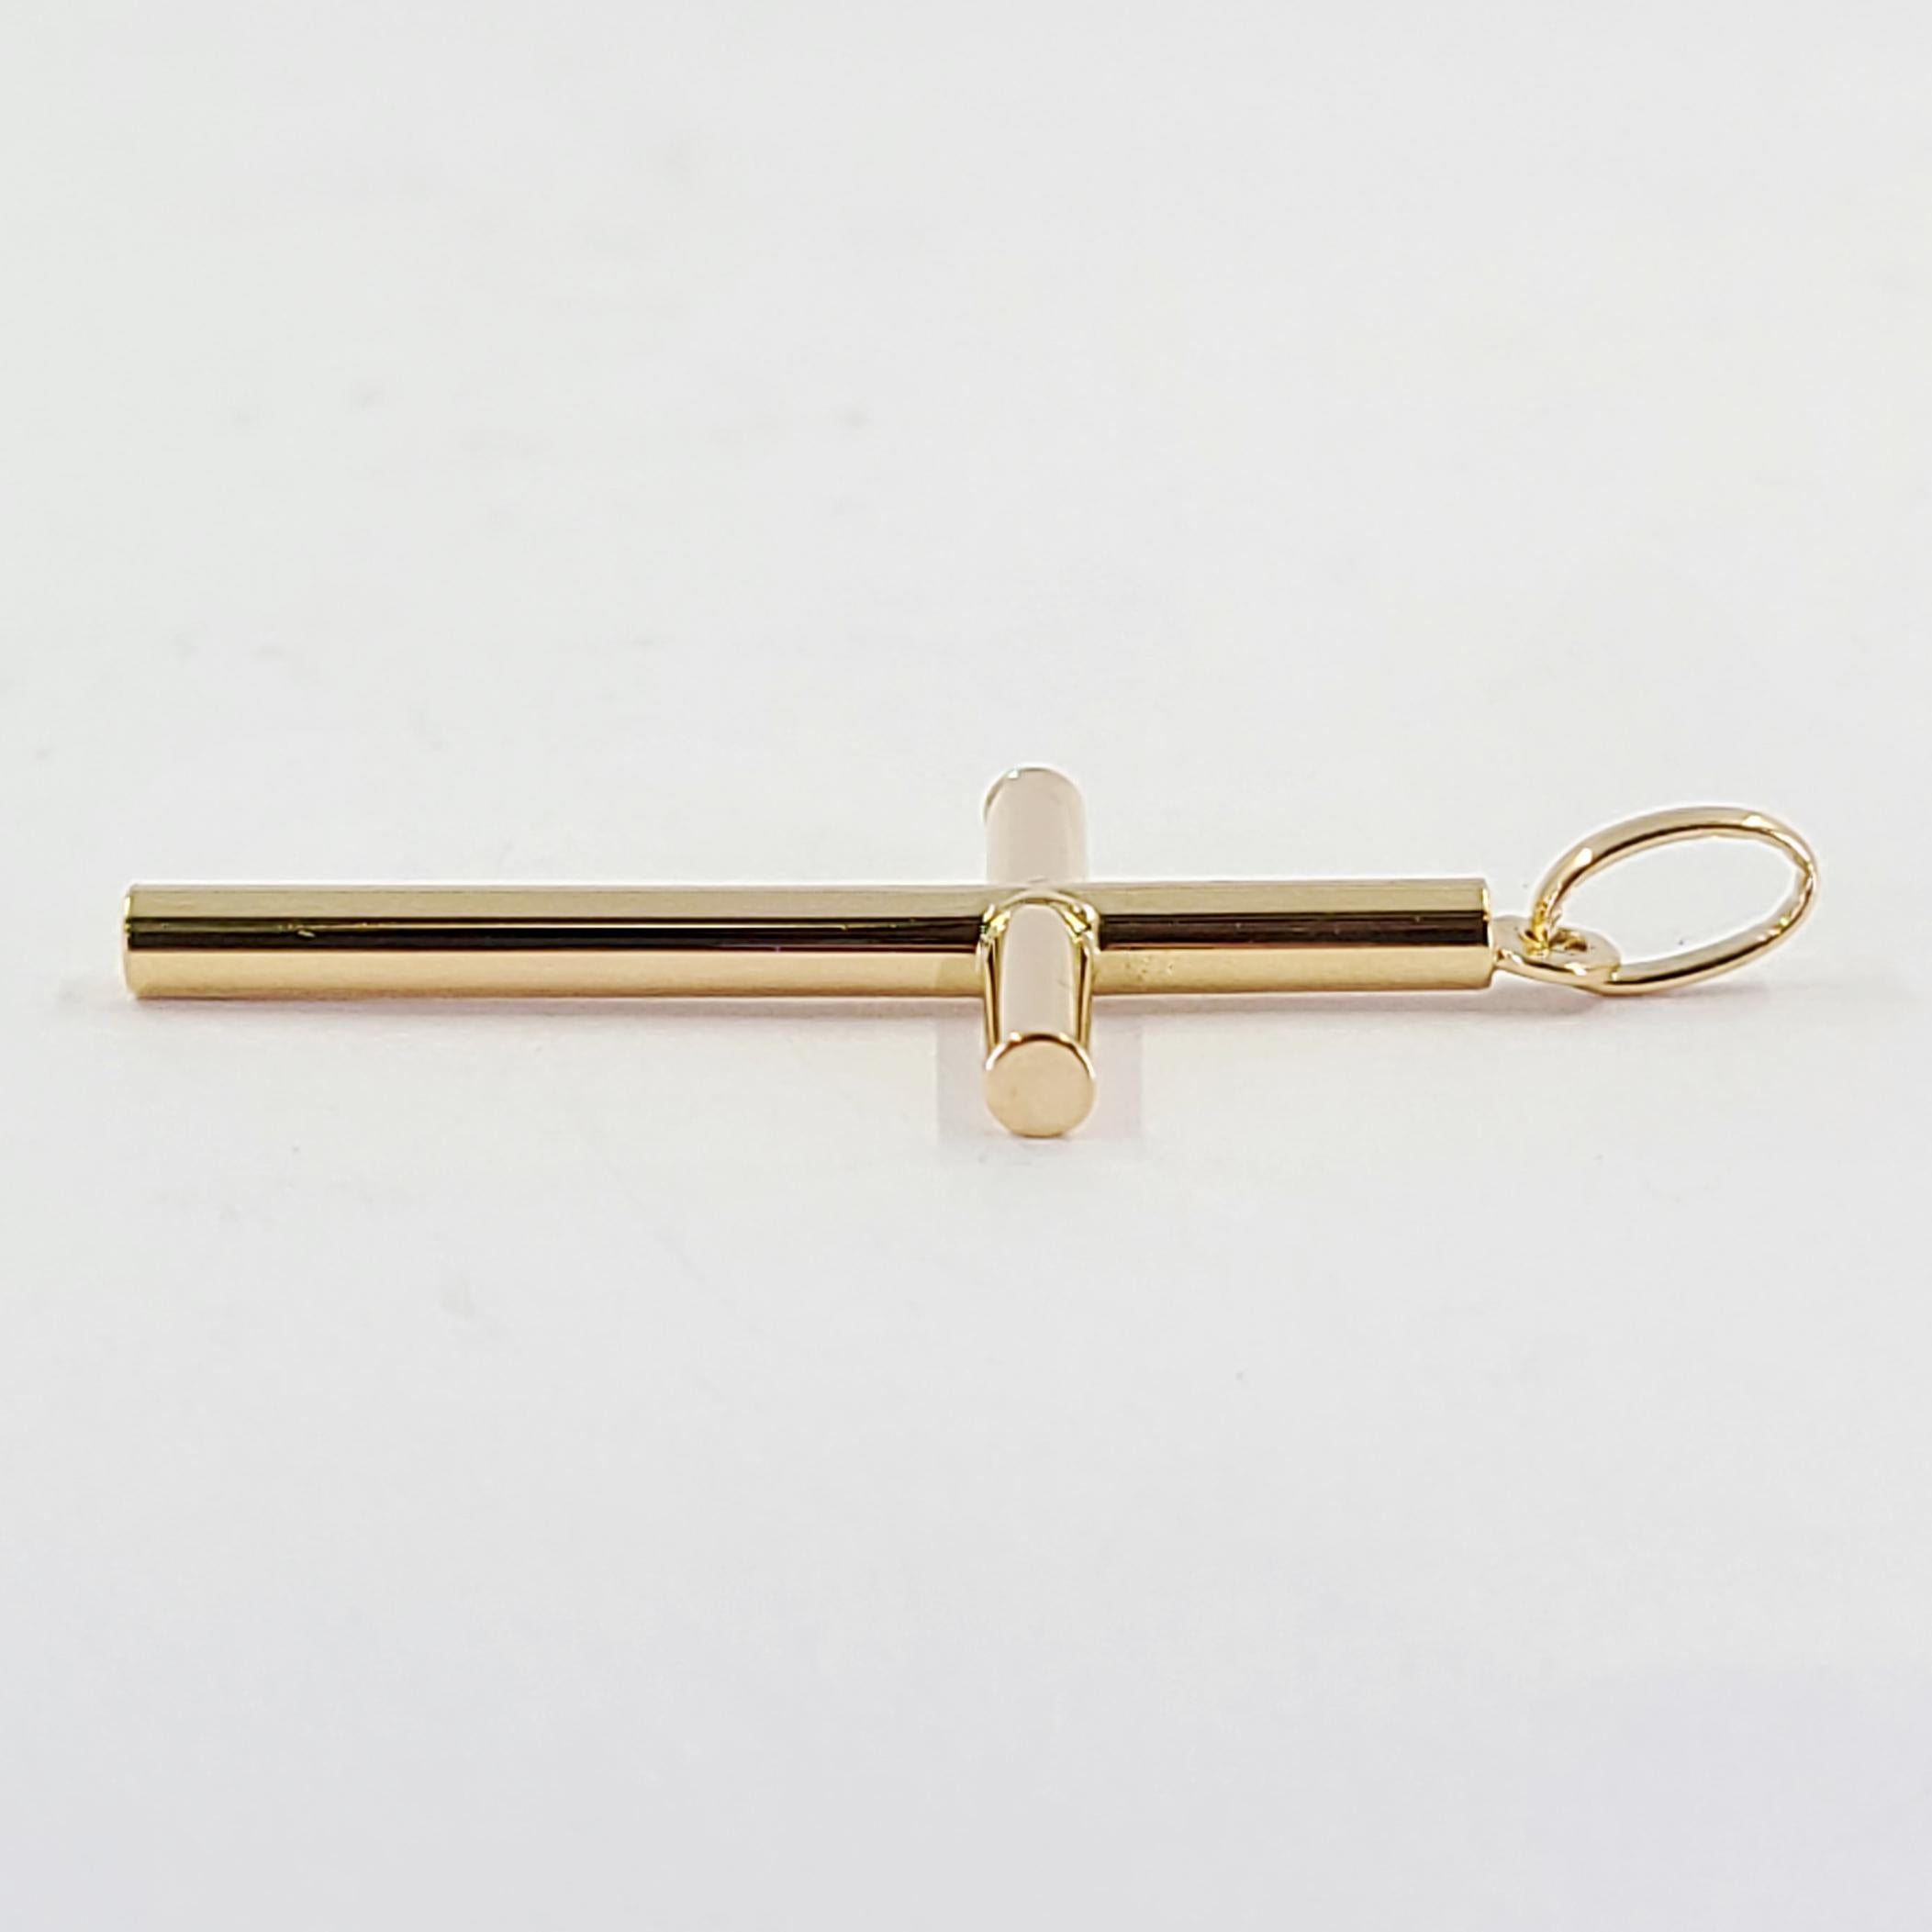 18 Karat Yellow Gold Large Rounded Tube Cross Measuring 1.75 Inches Long Including Bale. Finished Weight Is 2.4 Grams.